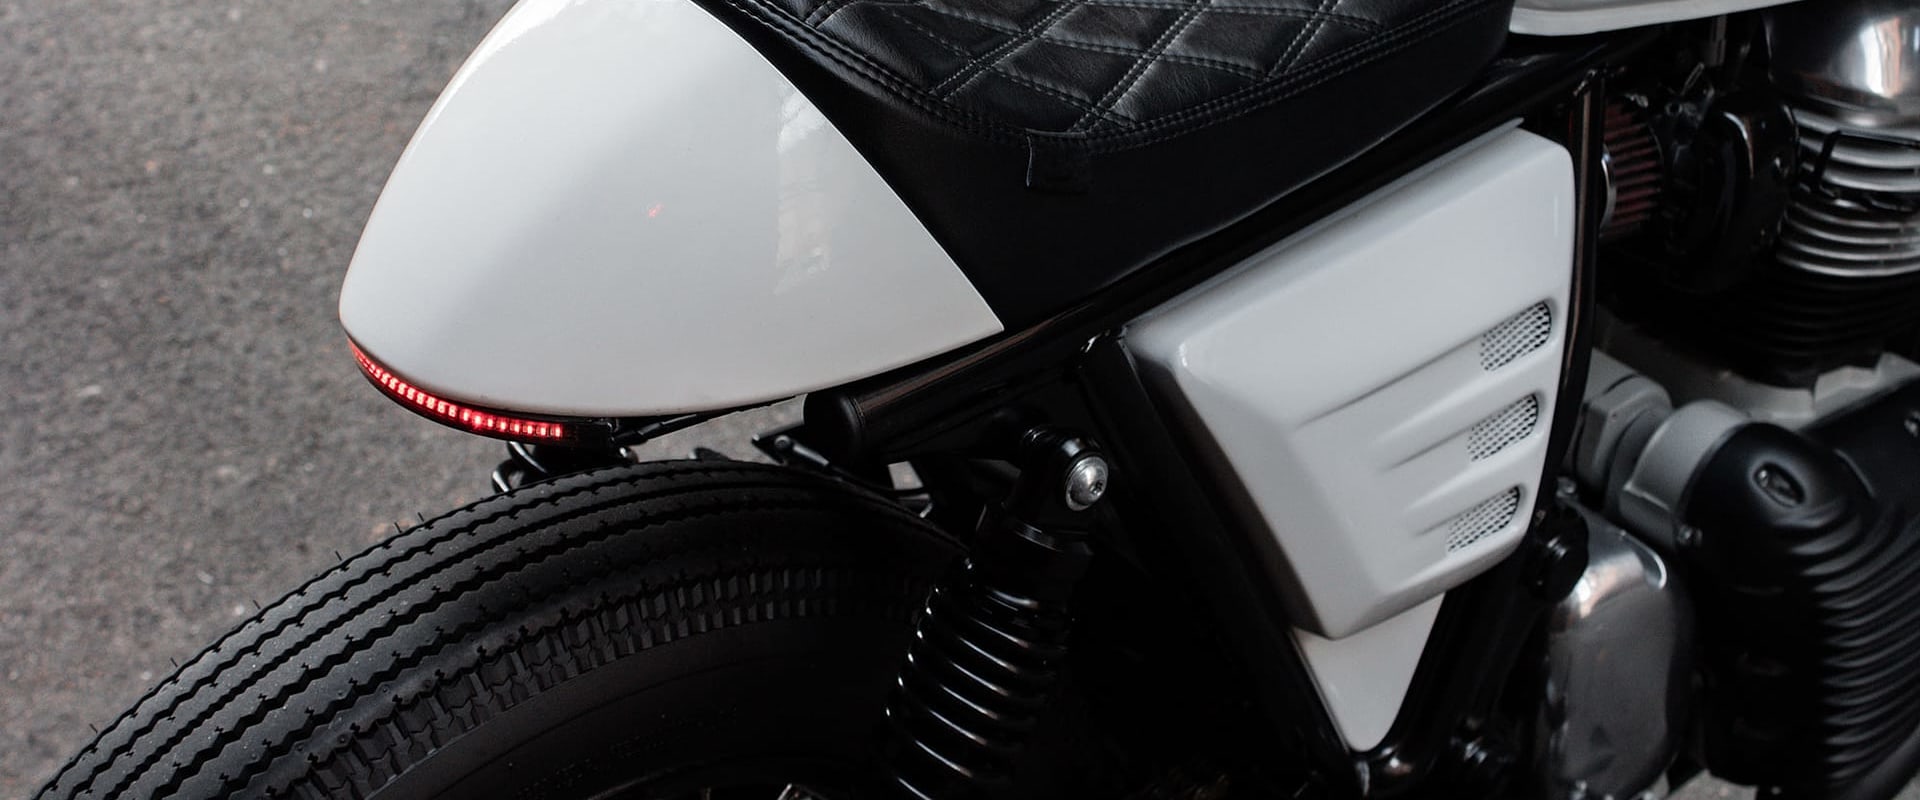 Custom Seats and Upholstery: Elevating Your Motorcycle's Aesthetics